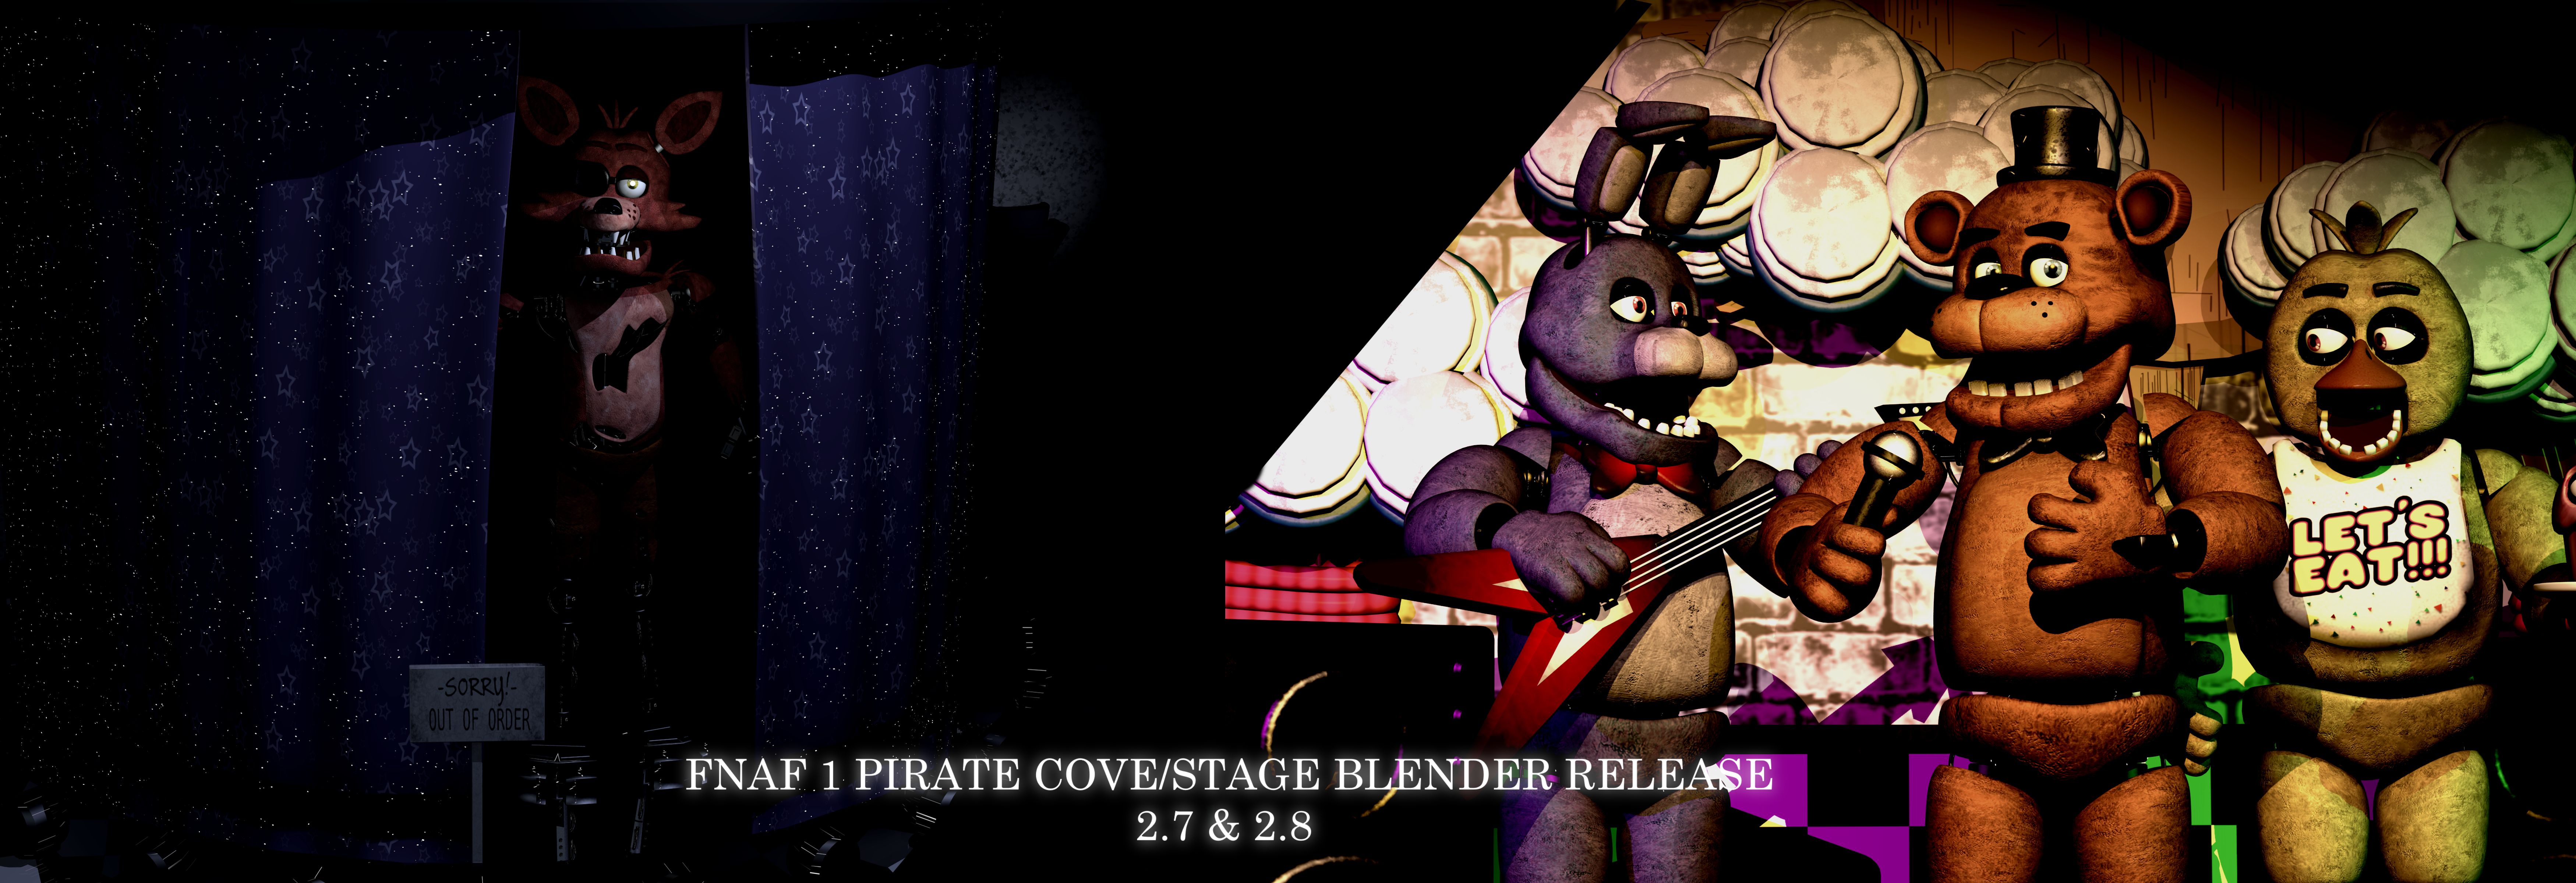 FNAF Freddy - Share Project - PCBWay